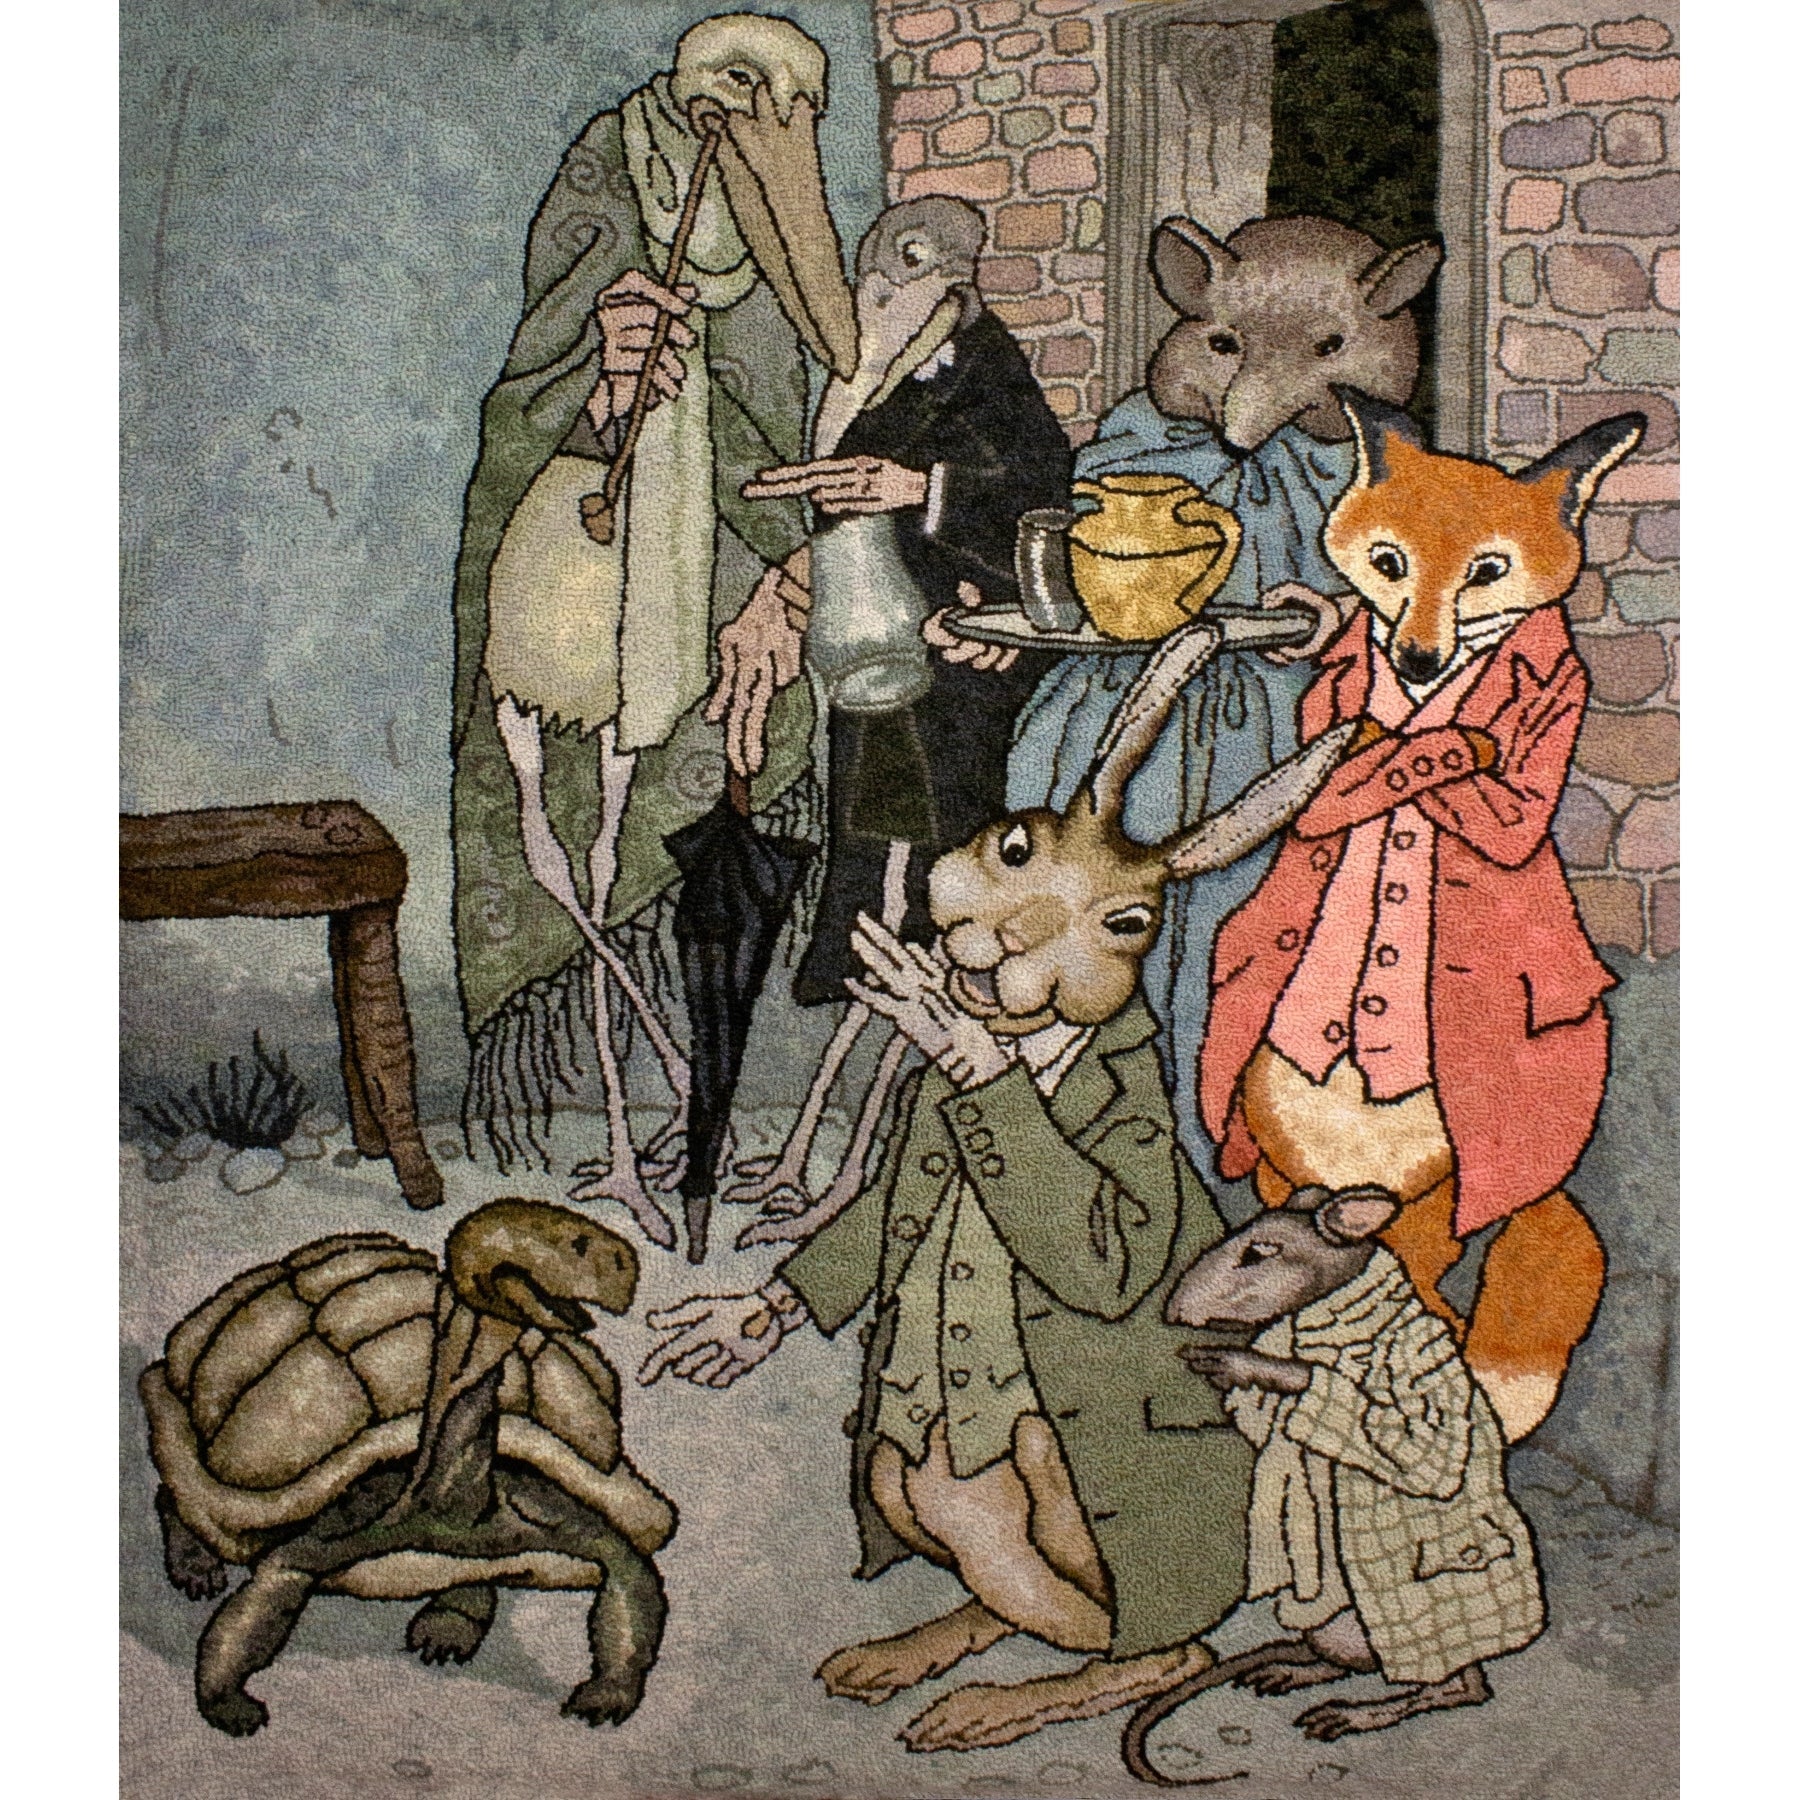 The Tortoise and the Hare, ill. Arthur Rackham, 1912, rug hooked by Susan Nash